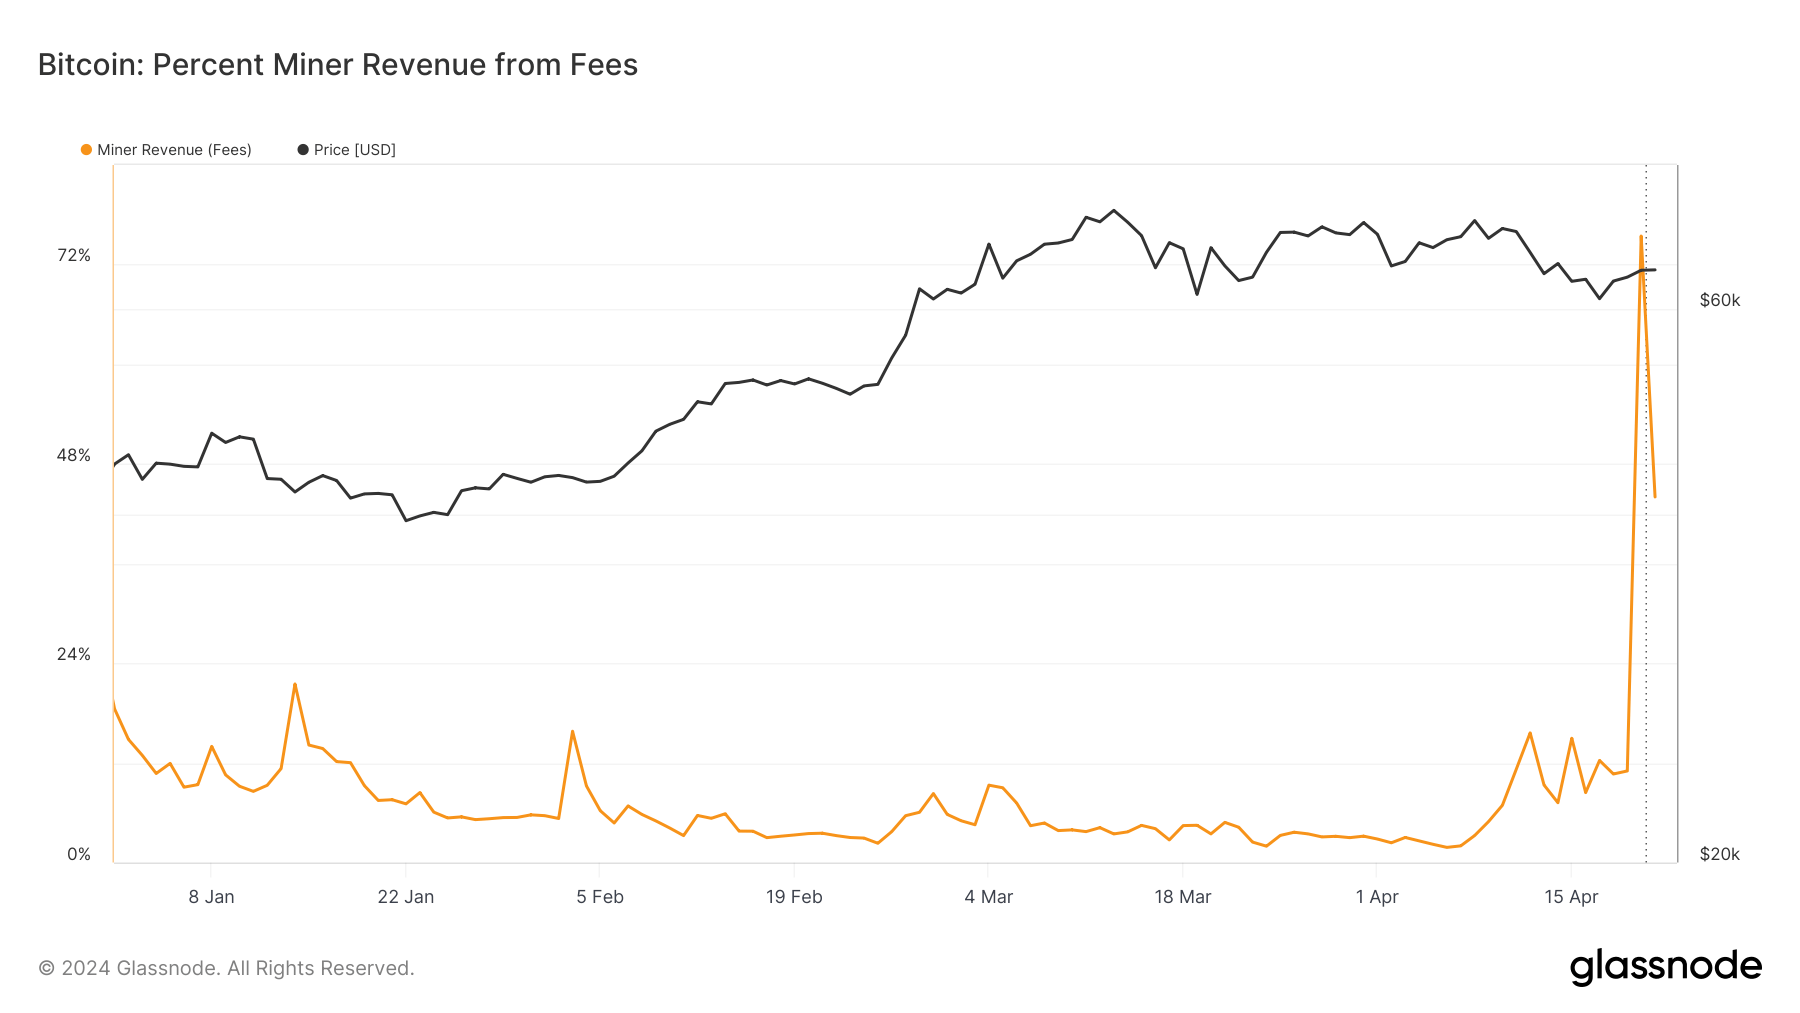 bitcoin miner percent revenue from fees ytd